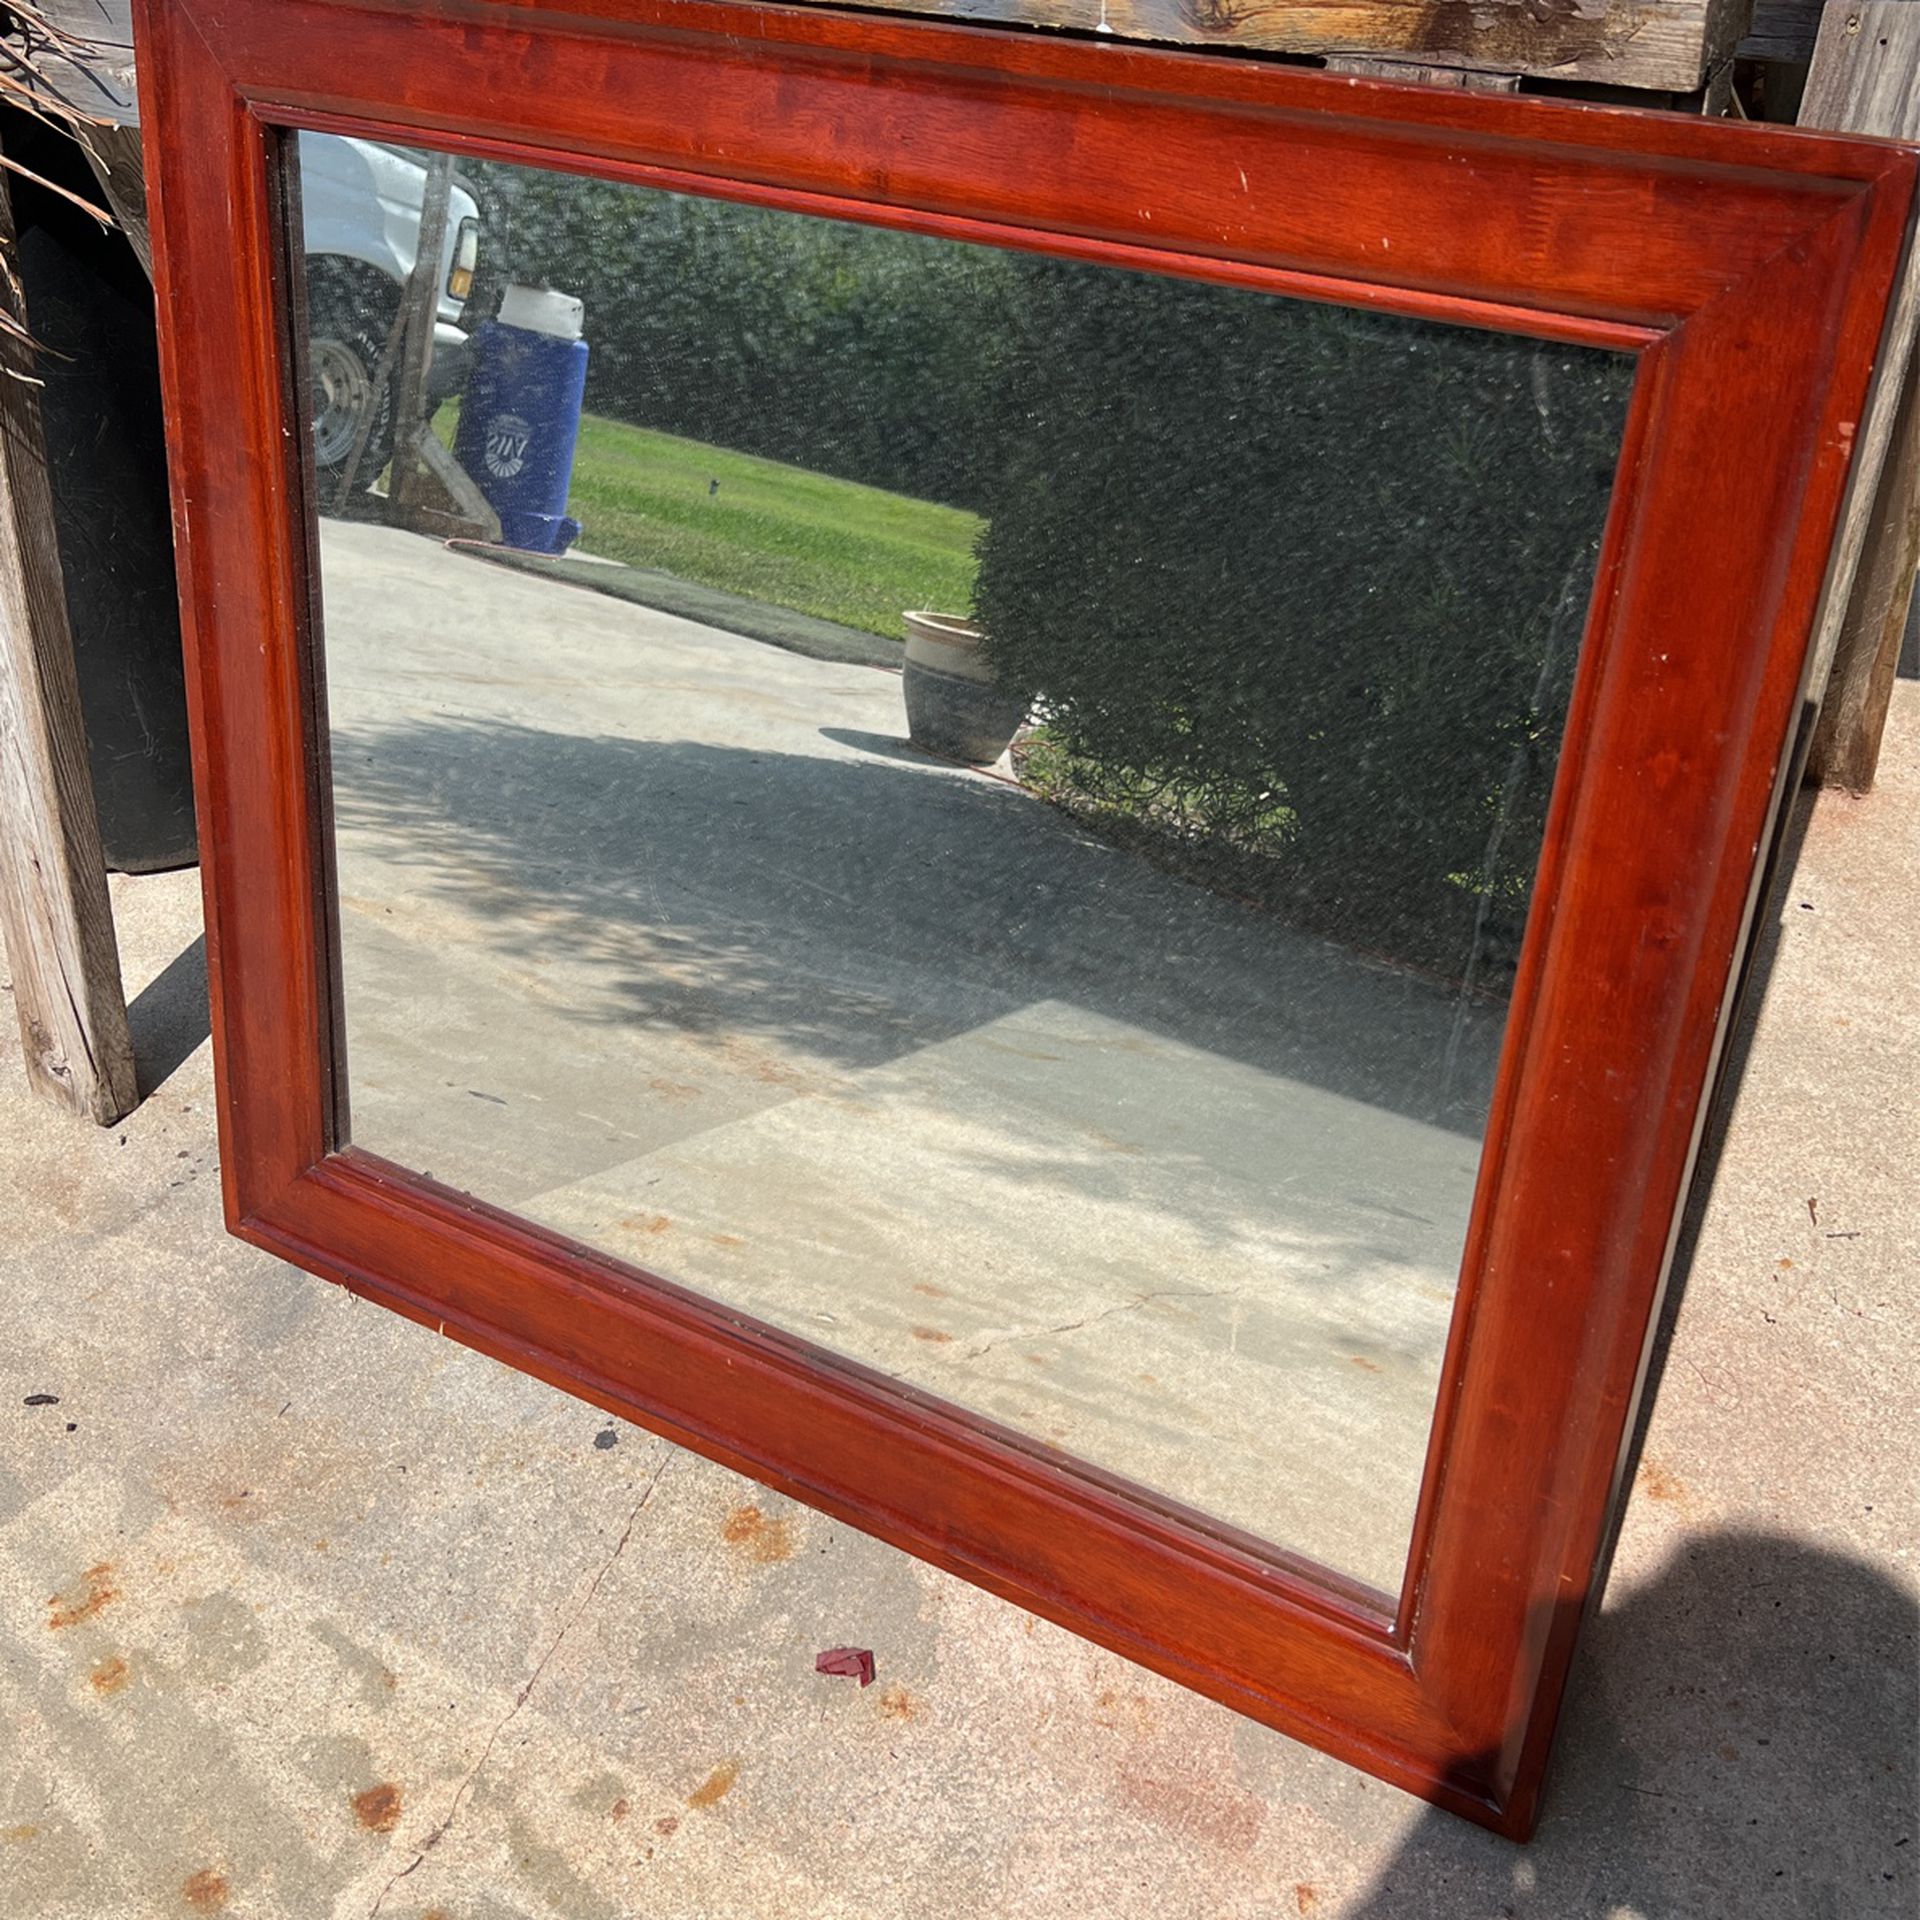 Mirror With Wood Frame 39” X 34.5” - Frame Needs A Little TLC. Good Project Mirror. $20.00